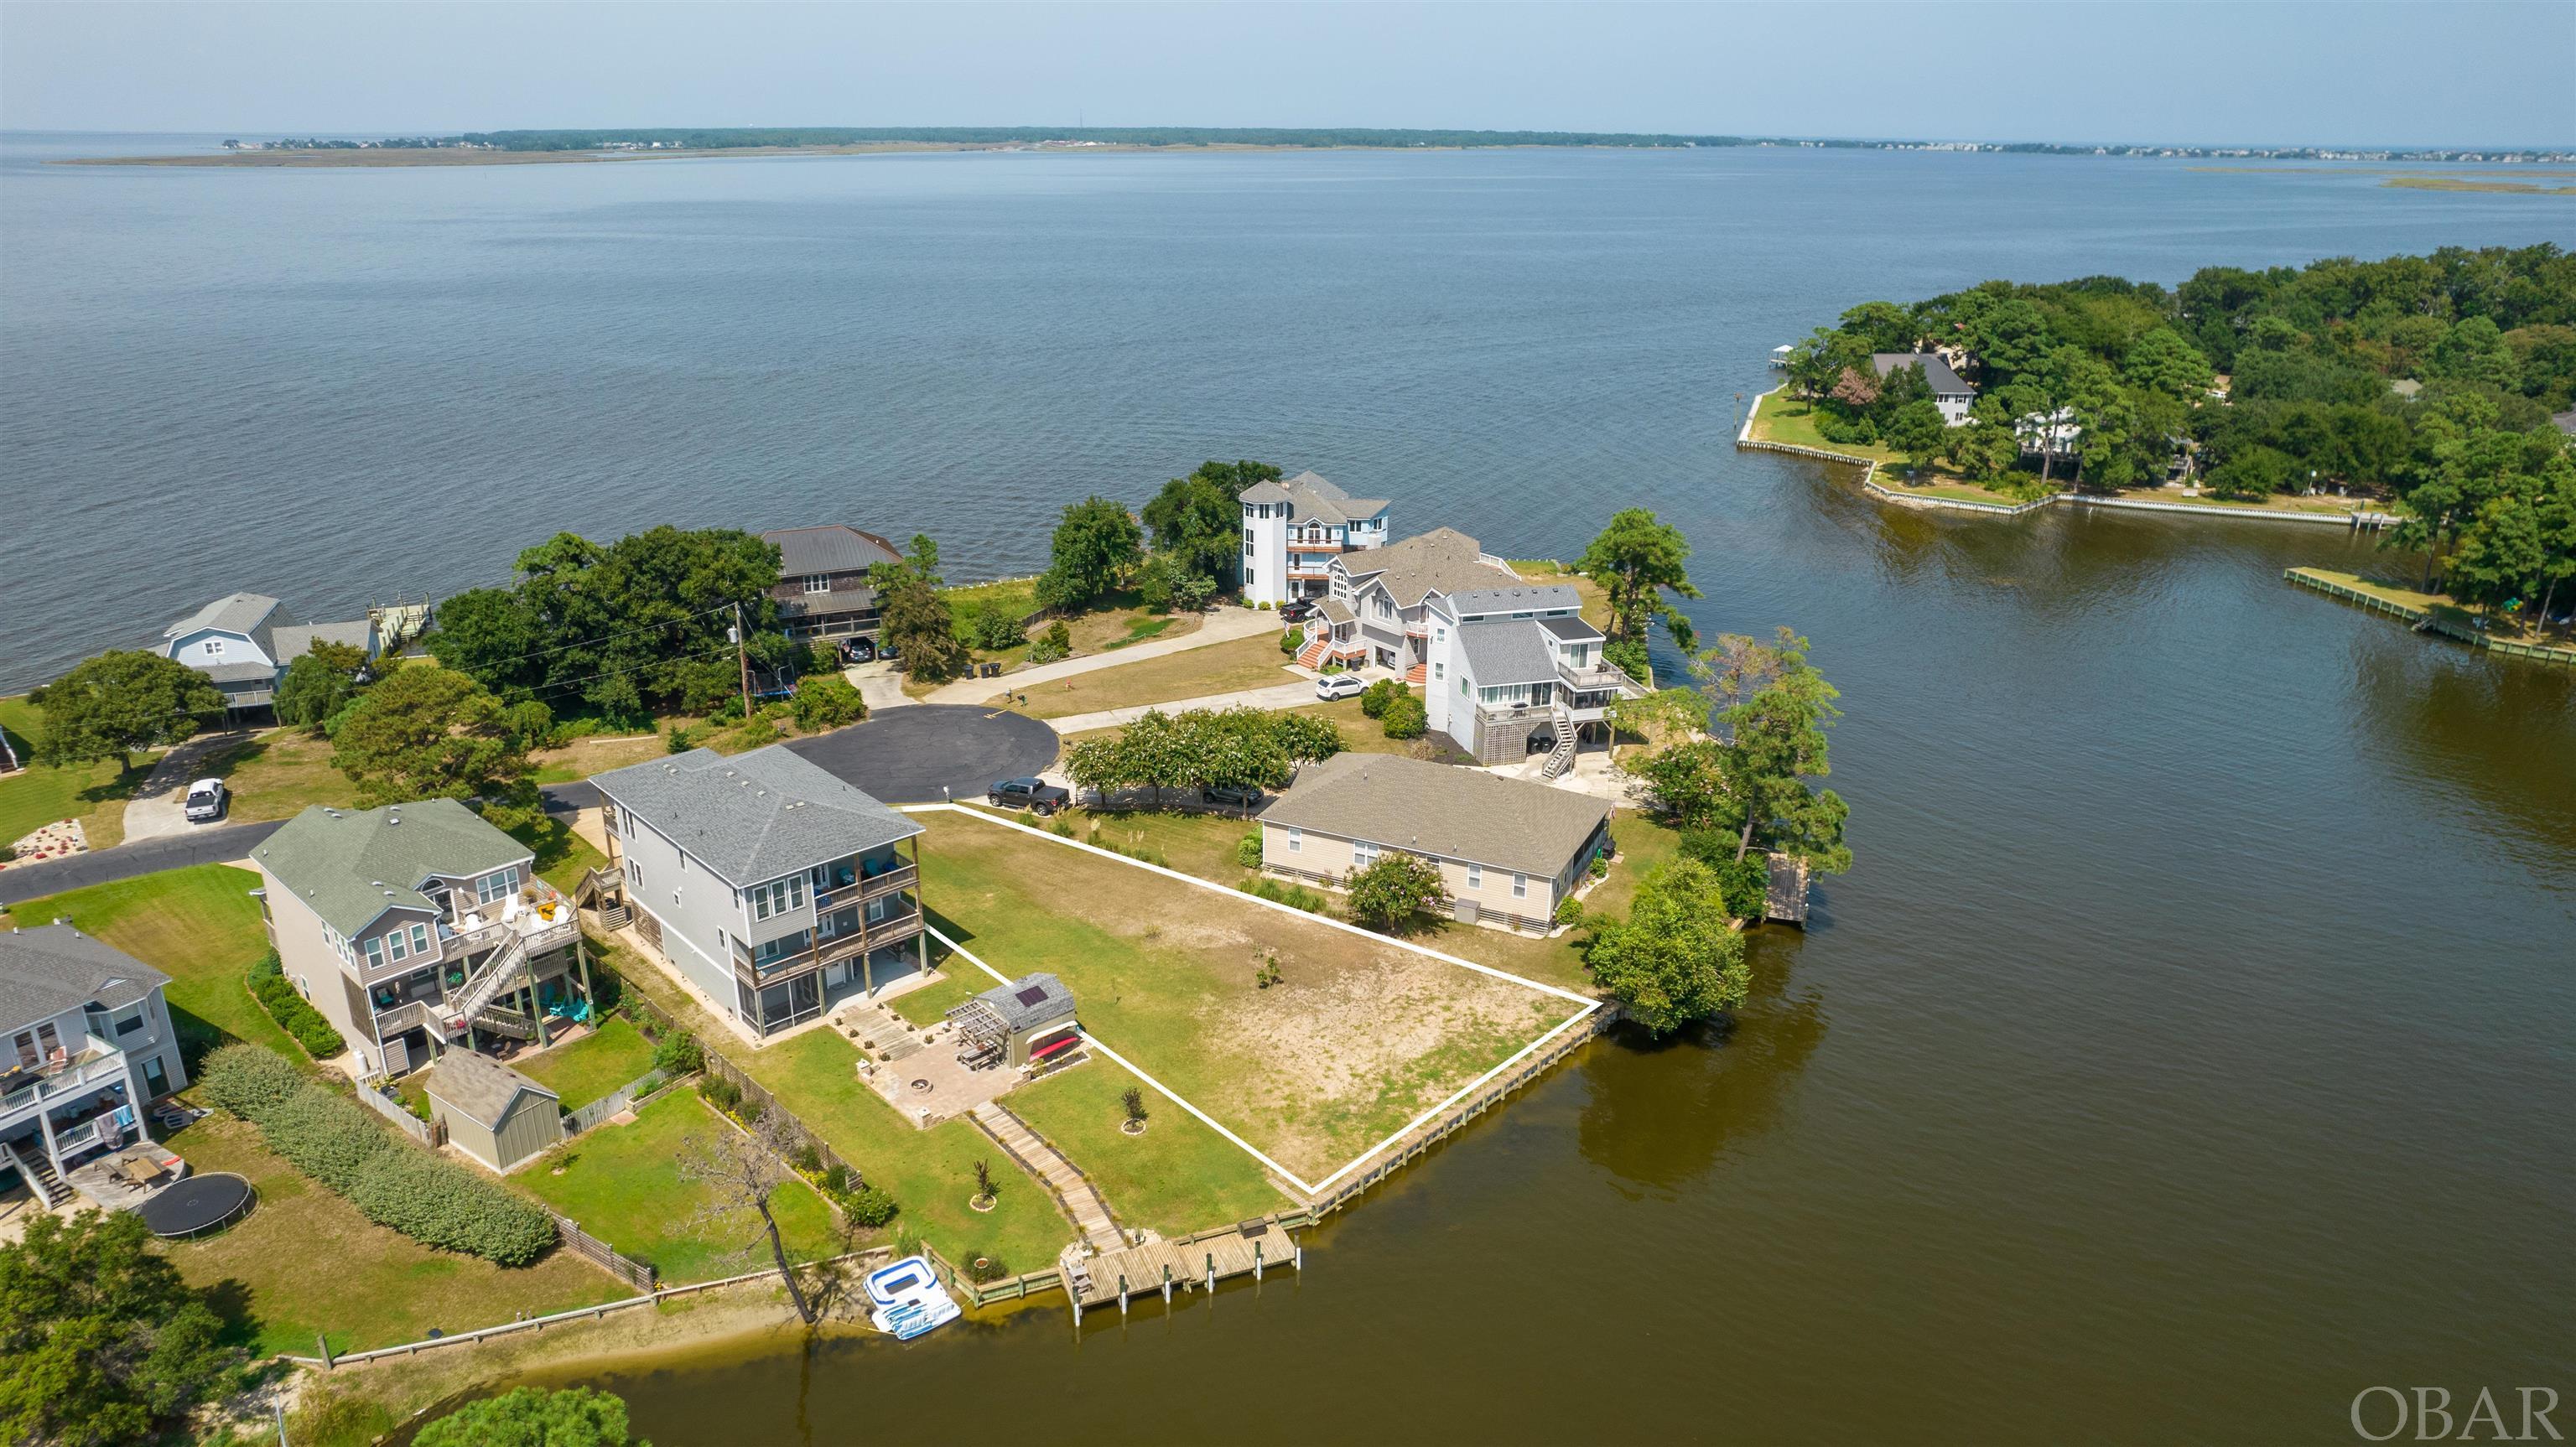 What a WONDERFUL opportunity to own a lot on a lake (reads more like large, wide, Canal that opens into Eagleton Point) in the Albemarle Sound off of Colington Island!  Over 80' of New Vinyl Bulkhead installed in 2021 borders flat and grassy Lot 24. Paddle a kayak in the quiet calm behind your lot or explore the sound to fish, swim, boat, sail, stand-up paddle board or create your own aquatic adventures!  Clipper Court is a short walk or bike ride to Colington Harbour Soundside Park which includes beach access, picnic area, playground, boardwalk and boat ramp.  Explore the possibilities of building your dream home to capture those amazing waterfront Sunsets! For approximately $100 joining fee and $200 per year, you may become a member of the Colington Harbour Yacht and Racquet Club (CHYRC.org) and enjoy the Clubhouse, pool and tennis courts.  Annual Association Fees are approximately $299 per year and include guarded gate, common areas, basketball court and maintenance of amenities. AE and X Flood Zones.